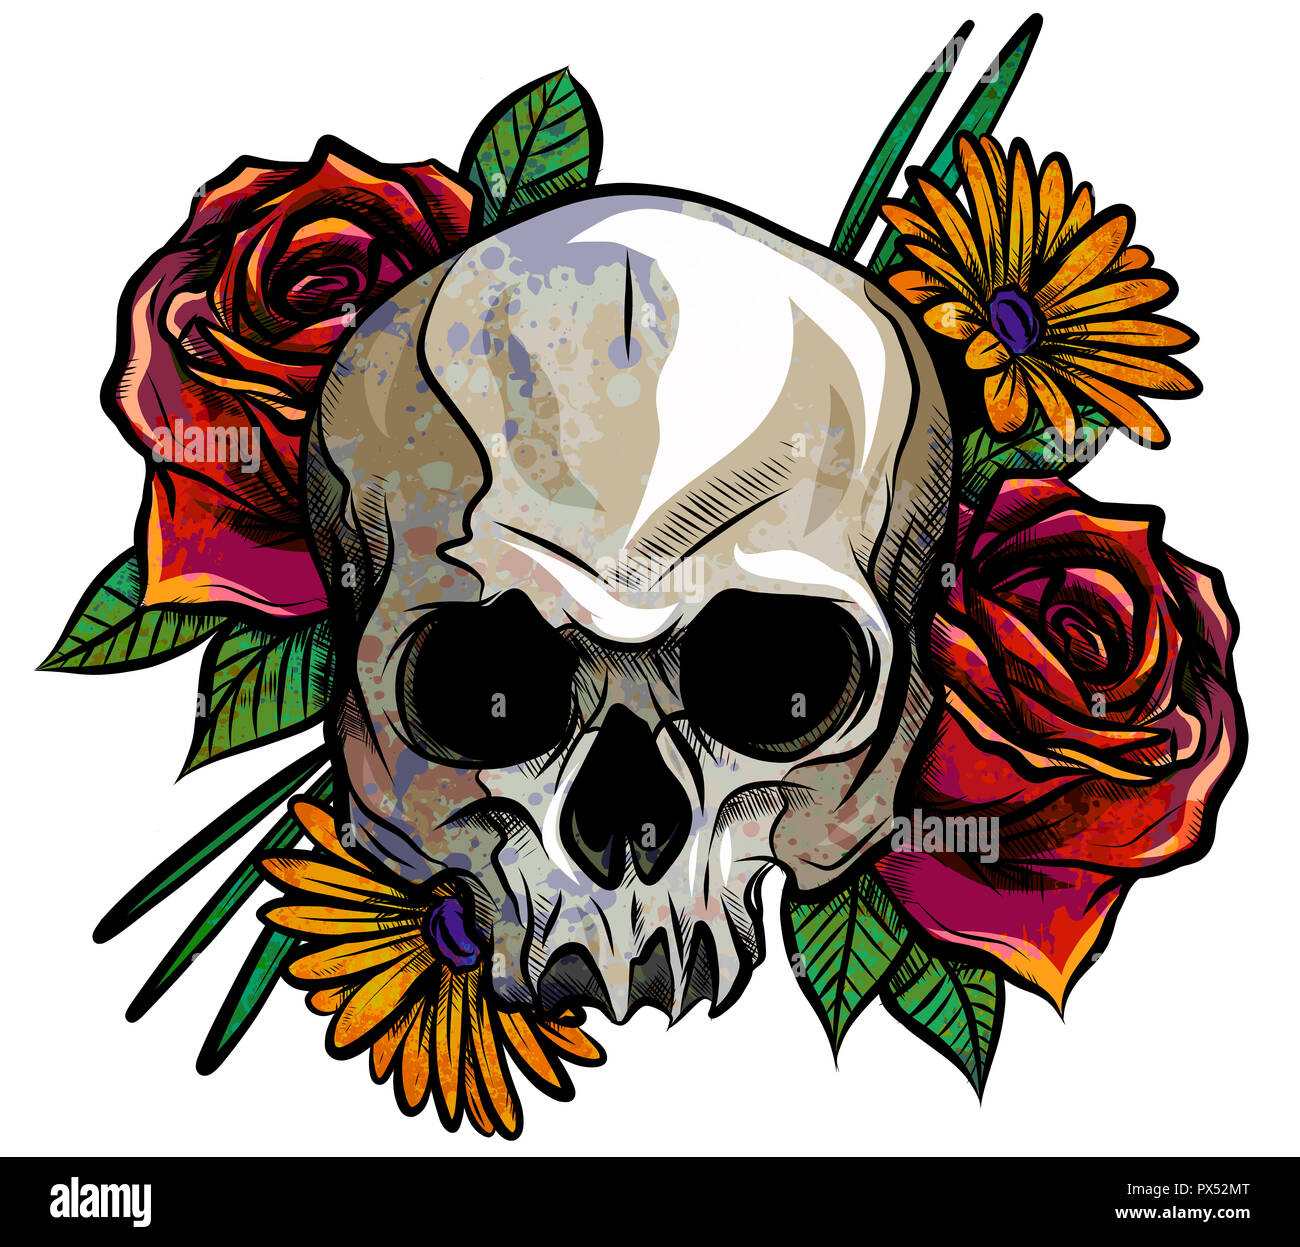 cool drawings of roses and skulls